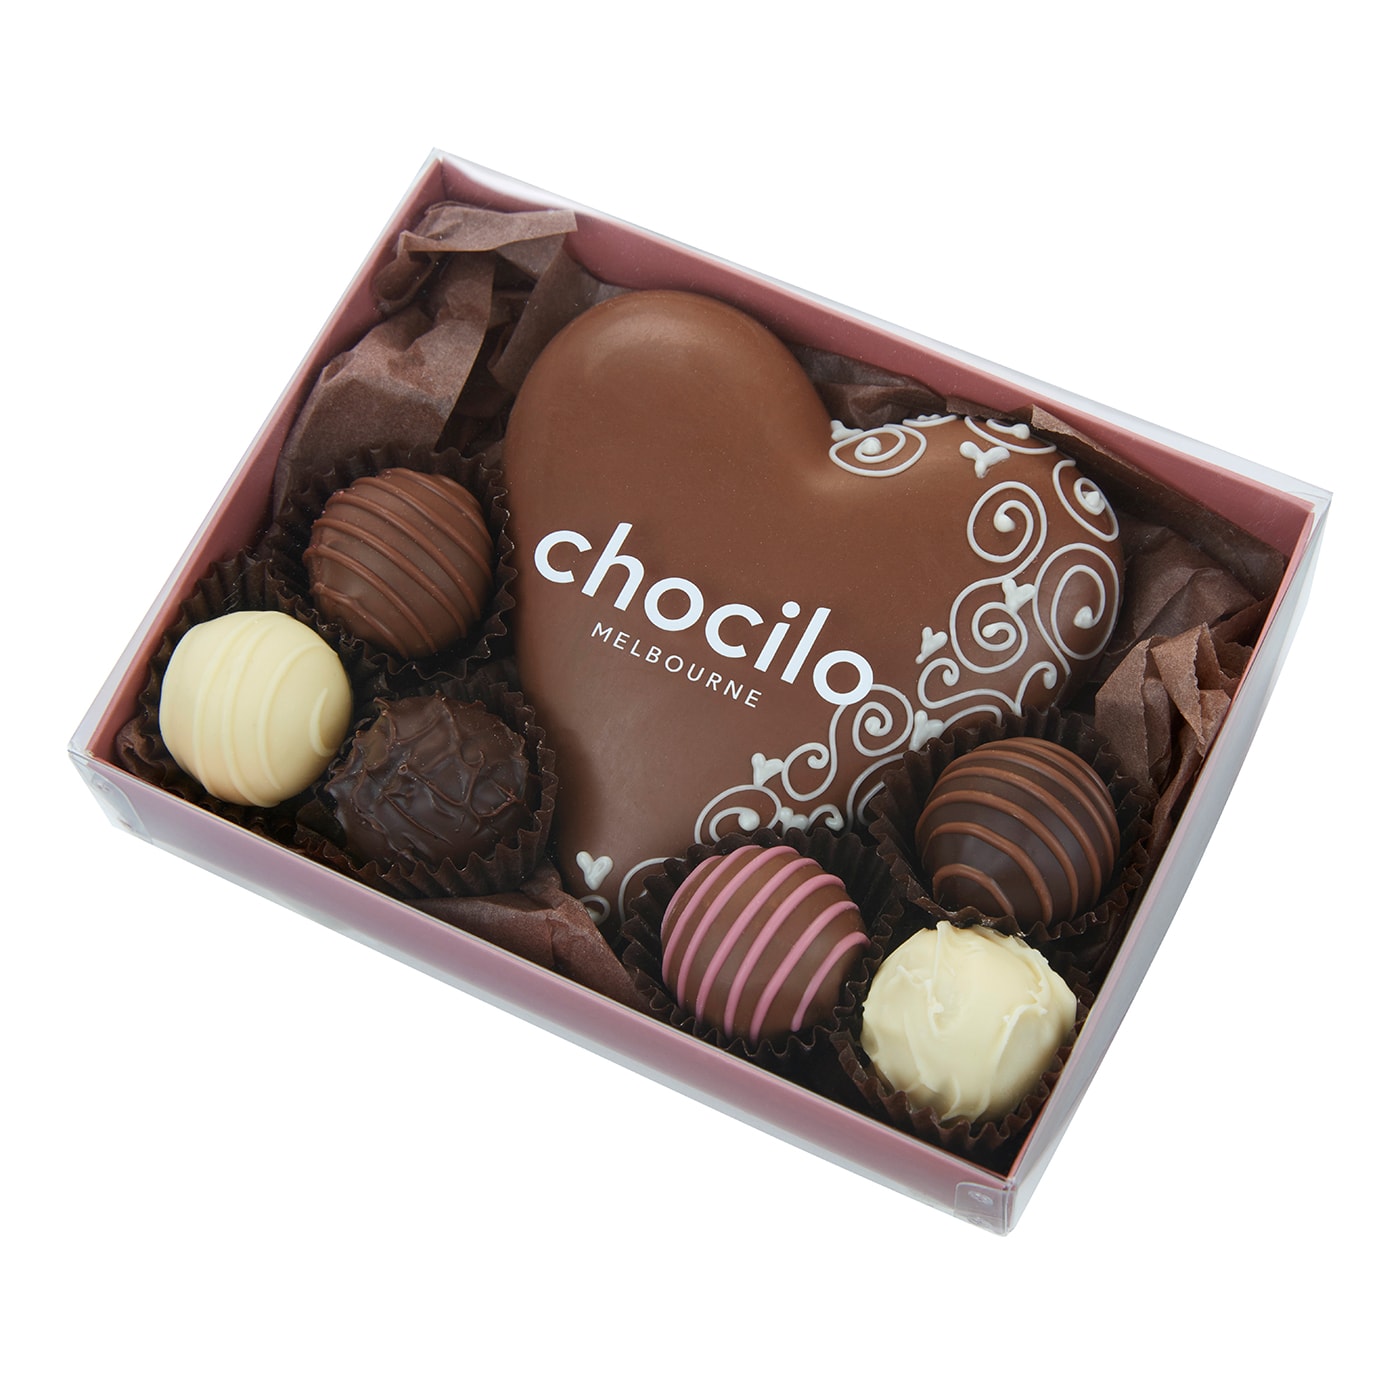 Chocilo Melbourne Milk Chocolate Heart with Assorted Chocolate Truffles Gift Box.